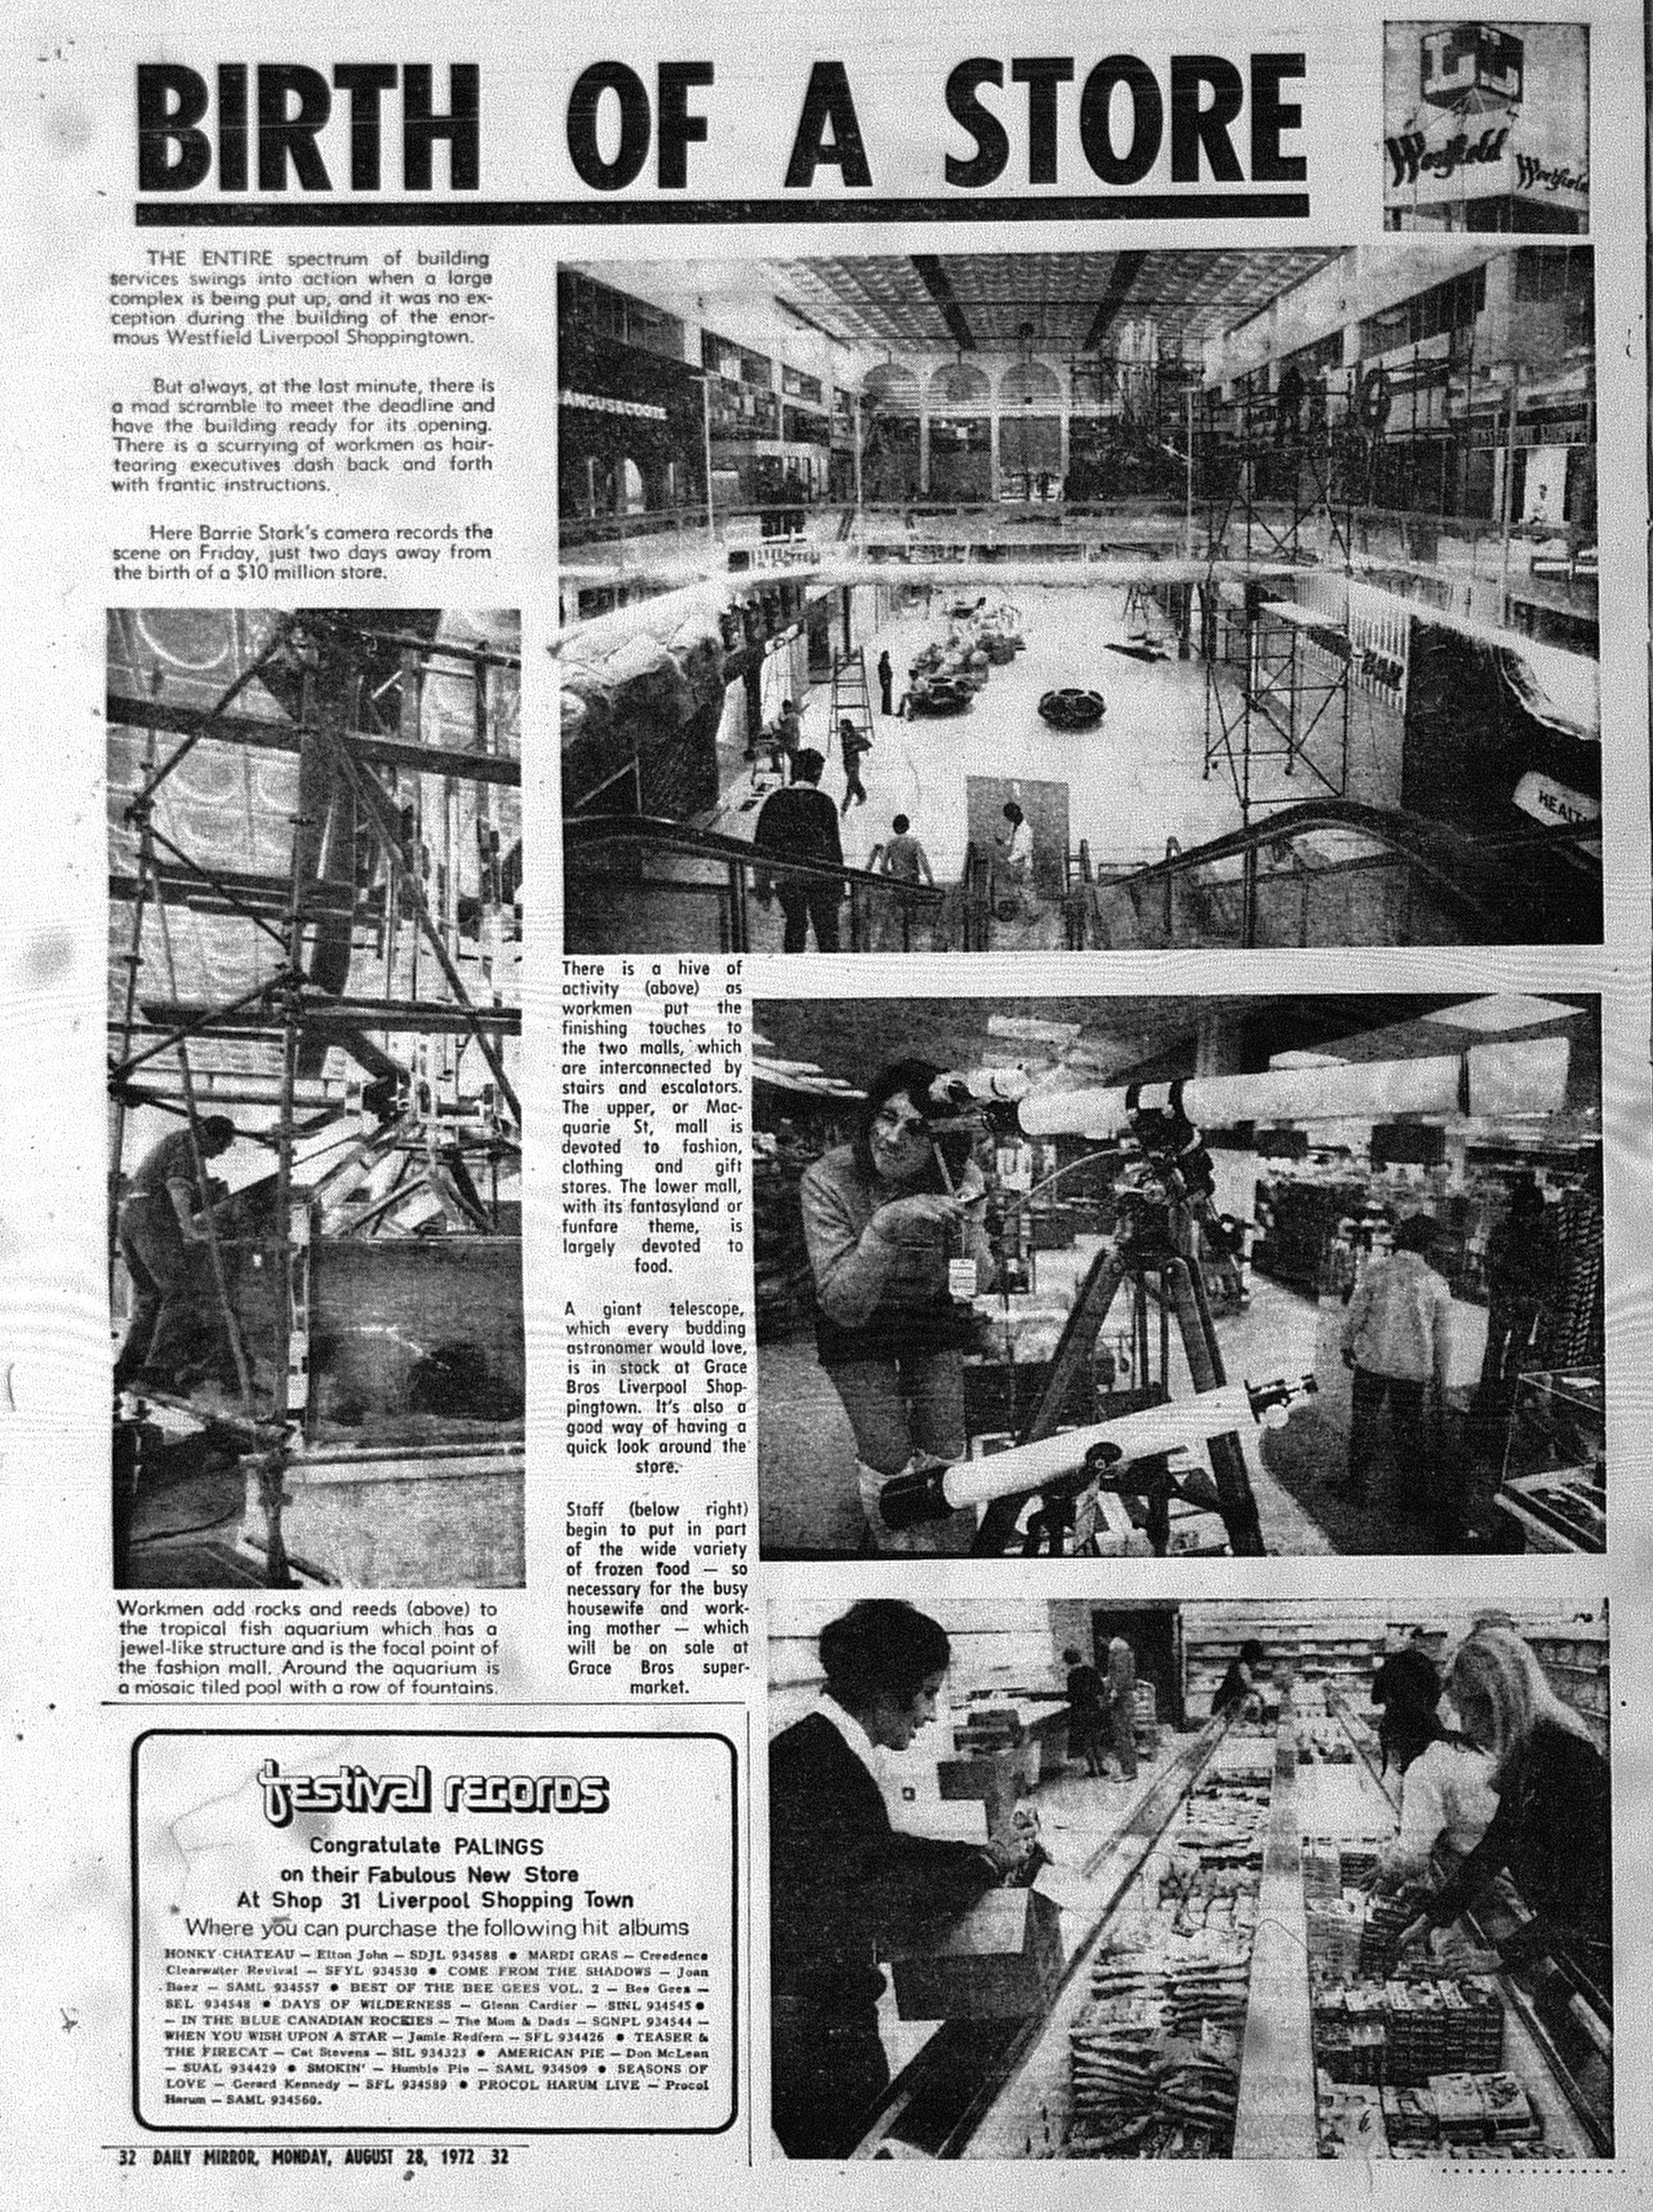 Westfield Liverpool Opening August 28 1972 Daily Mirror 32